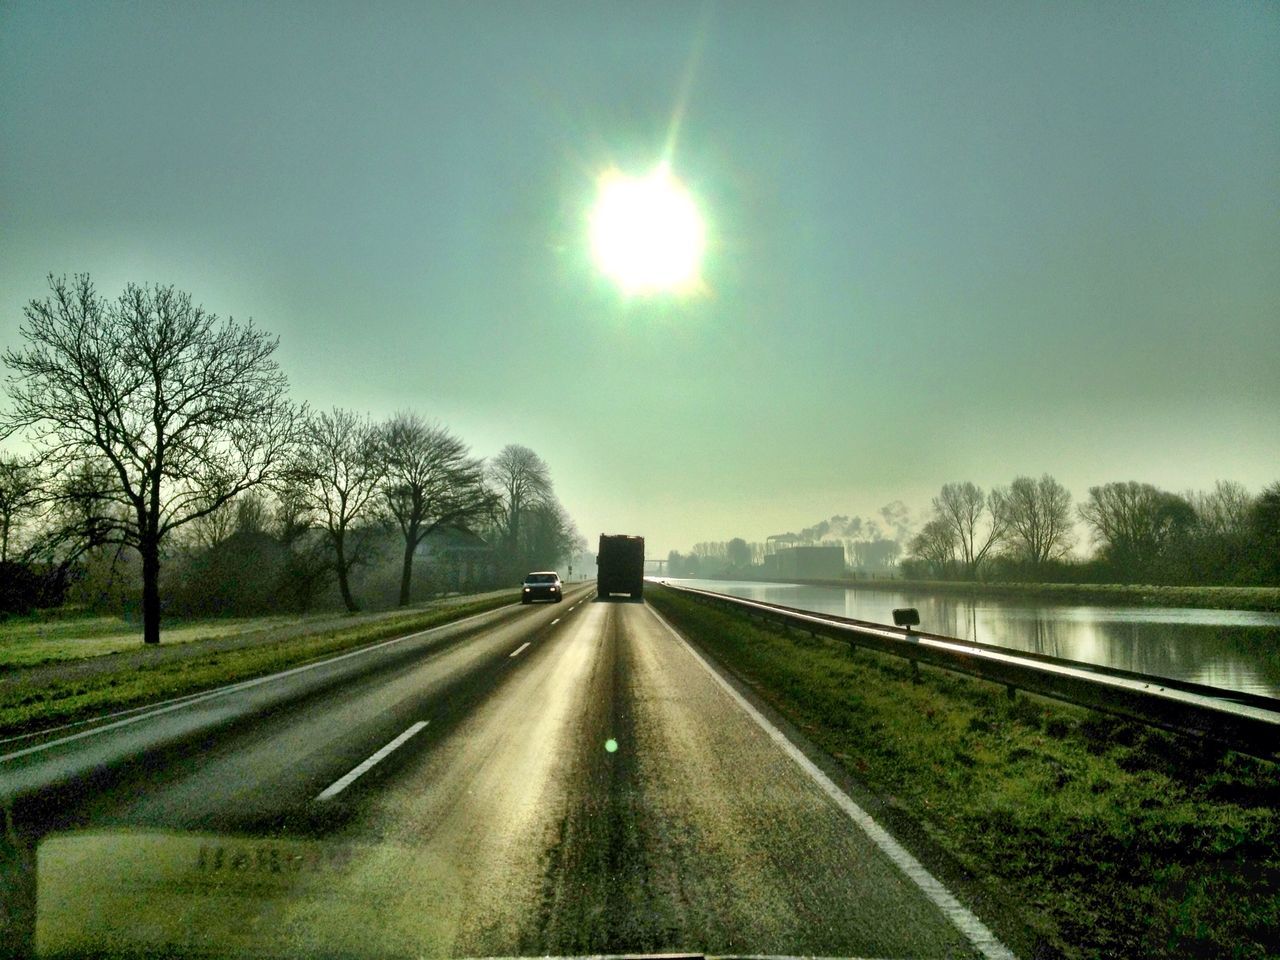 transportation, tree, sun, road, the way forward, sky, water, grass, sunlight, diminishing perspective, vanishing point, car, nature, tranquility, lens flare, sunbeam, bare tree, tranquil scene, reflection, no people